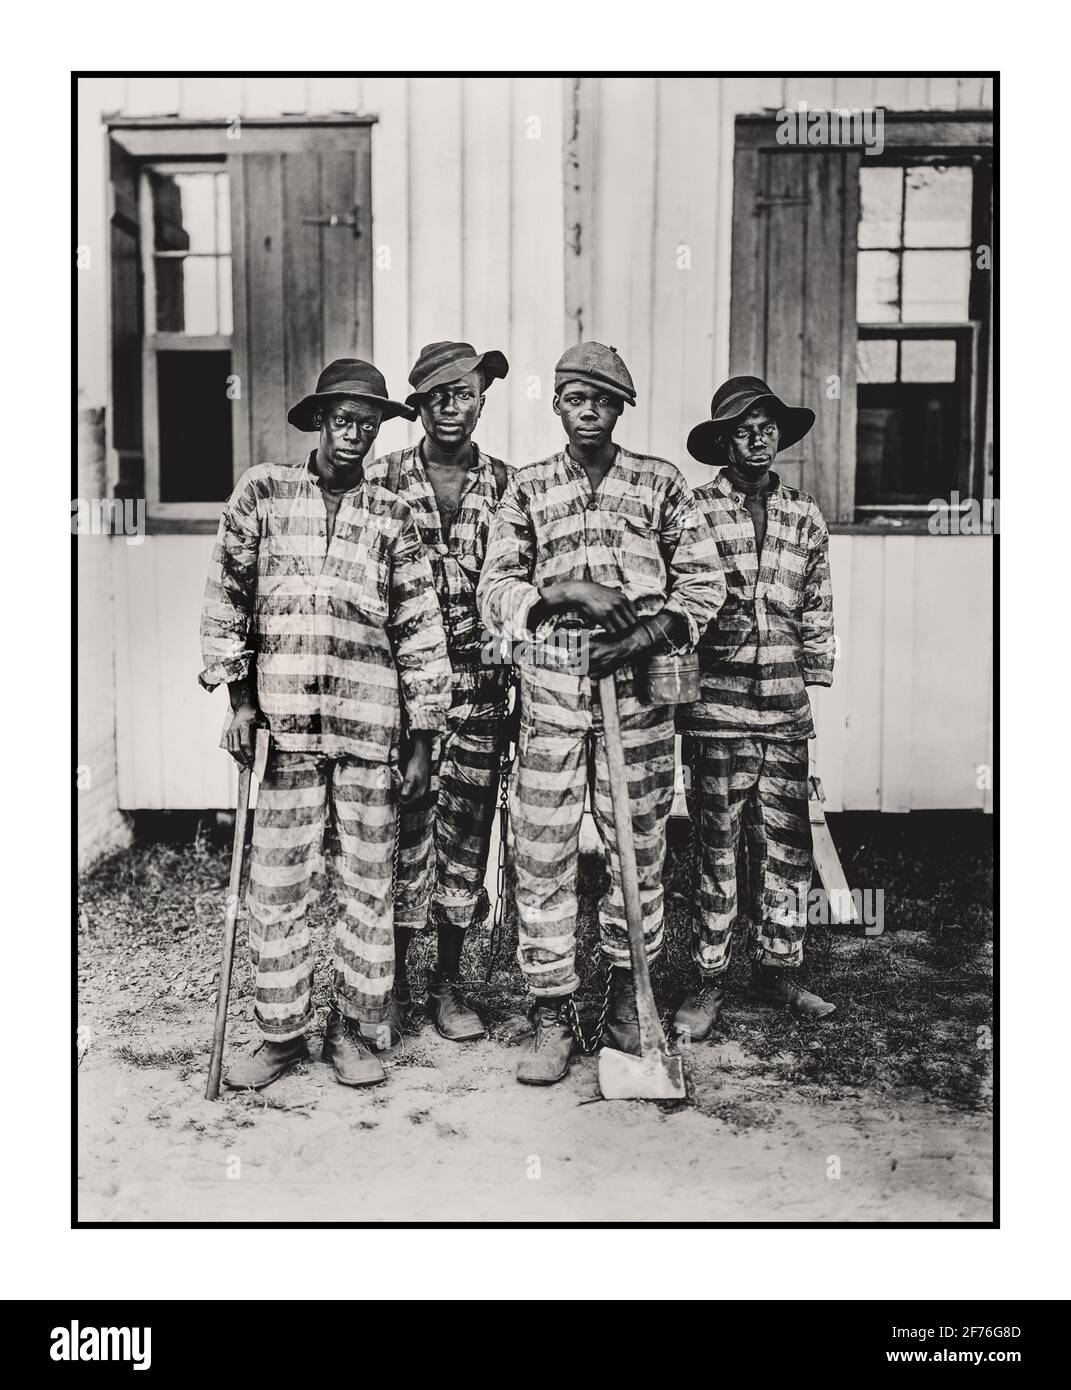 A southern chain gang of African American prisoners outside with their work tools. They were forced to perform hard menial tasks as an added form of punishment. Usually found in southern states of America USA 1900-1906 Stock Photo